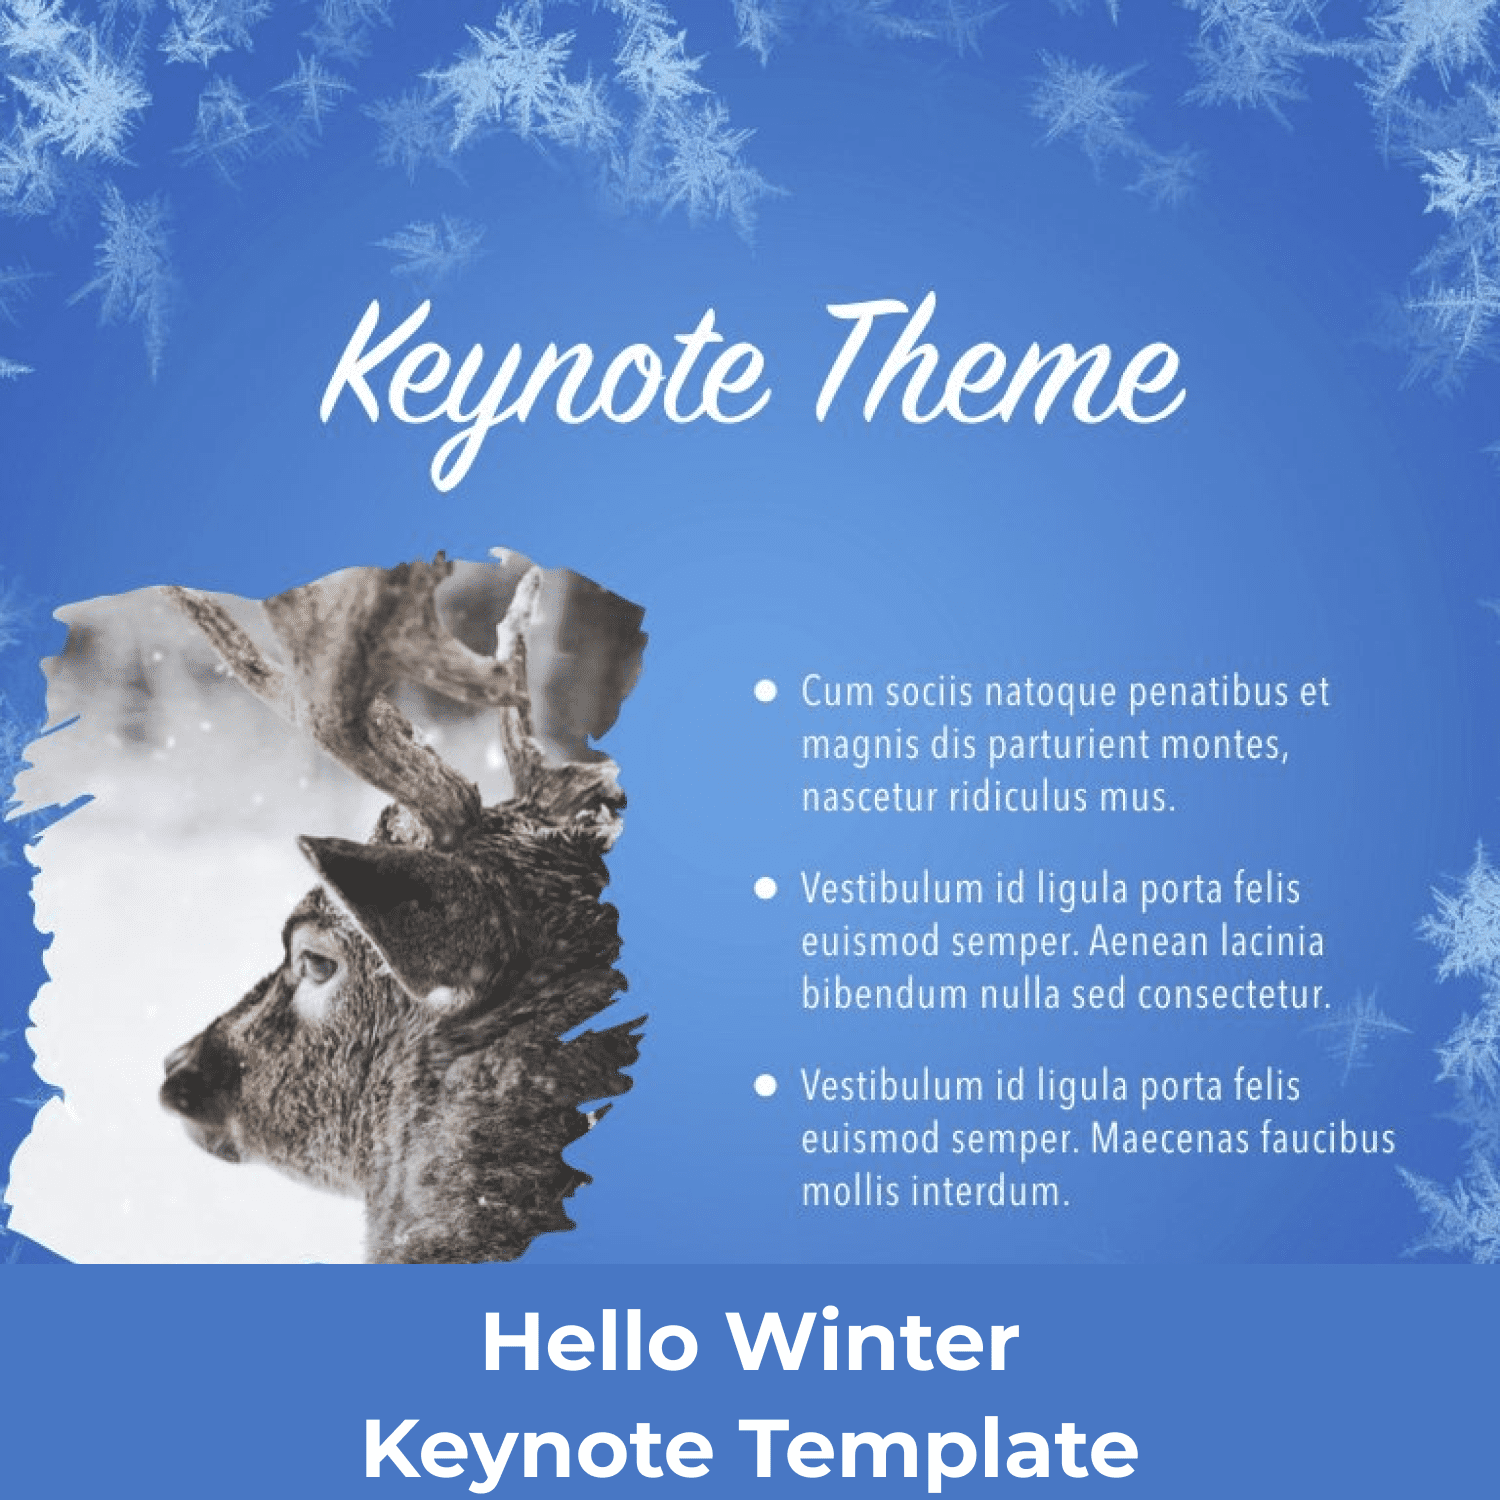 The Hello Winter template offers a professional look for your unique Keynote slideshows.